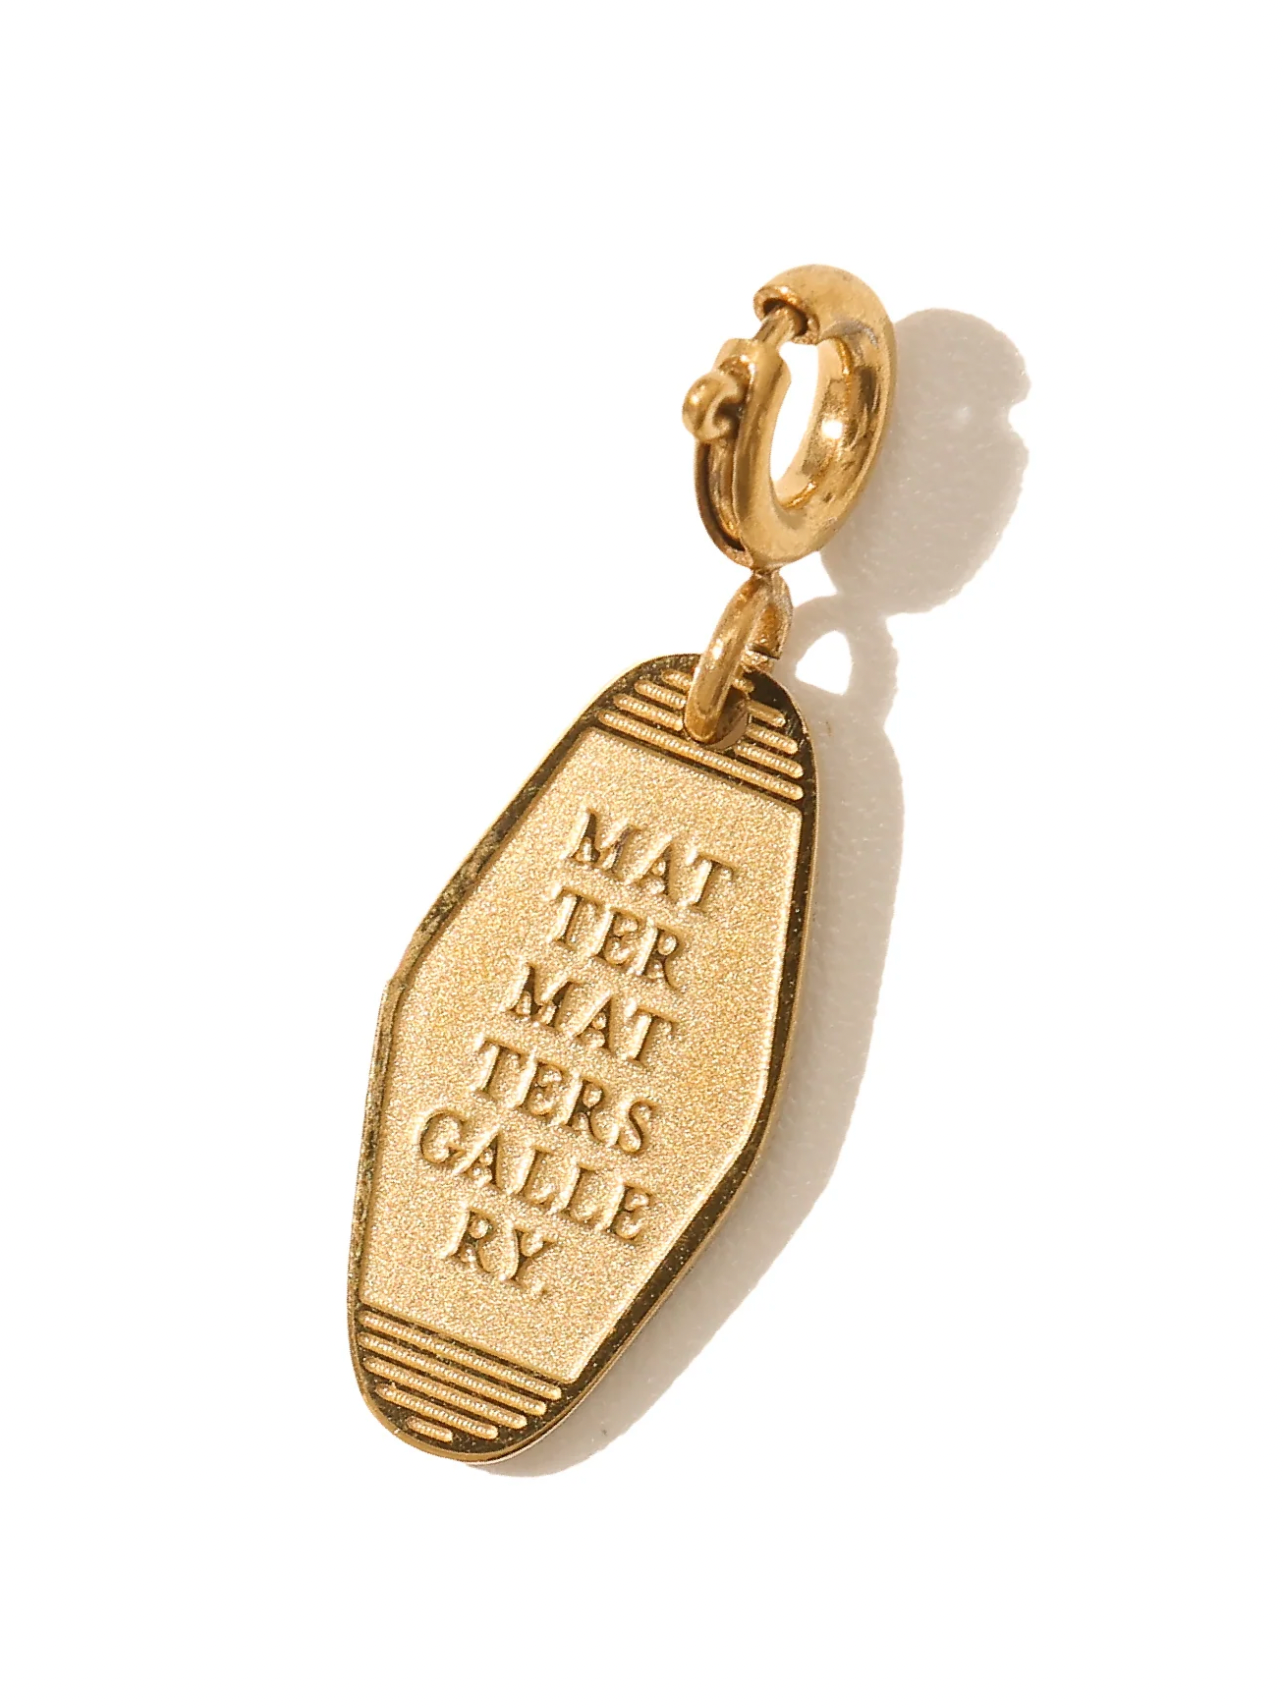 Matter Matters 'Miracles Happen Everyday' Key Tag Pendant • Gold